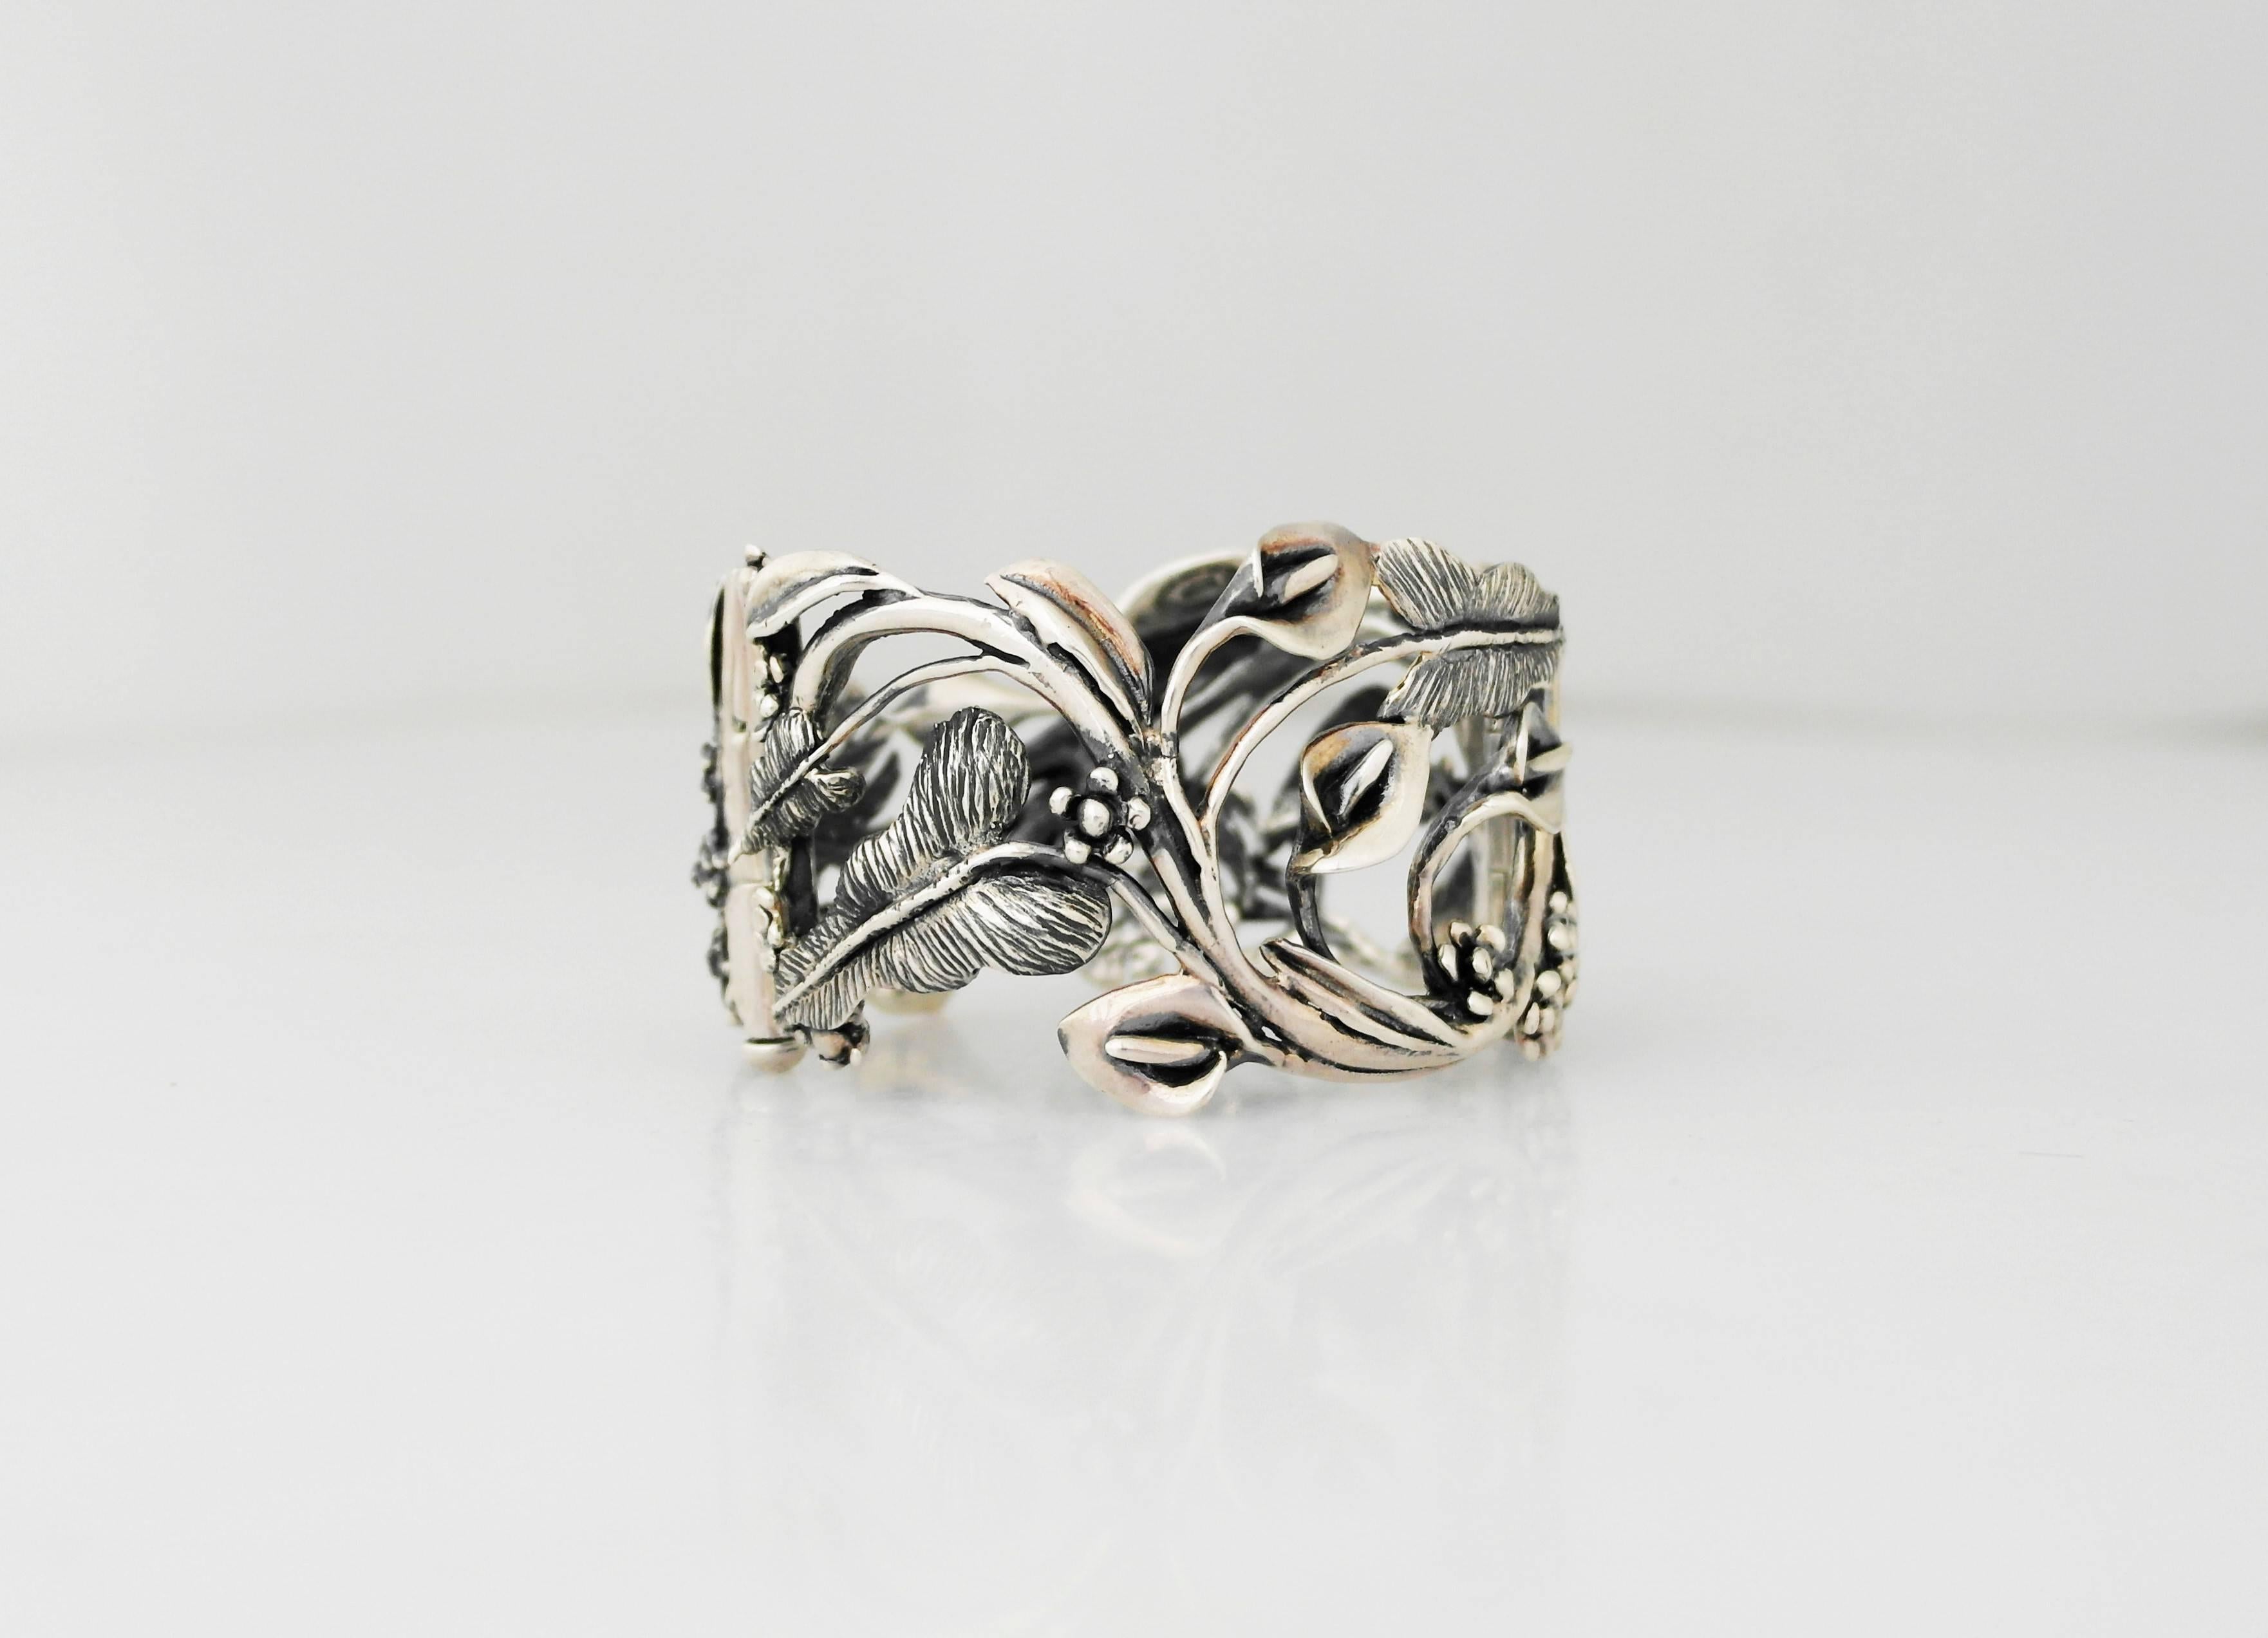 Being offered is a large and rare circa 1990 .950 silver (better than sterling) bracelet by Emilia Castillo of Taxco, Mexico. Heavy bracelet in a pierced design with intricate foliate. Dimensions: 7 1/4